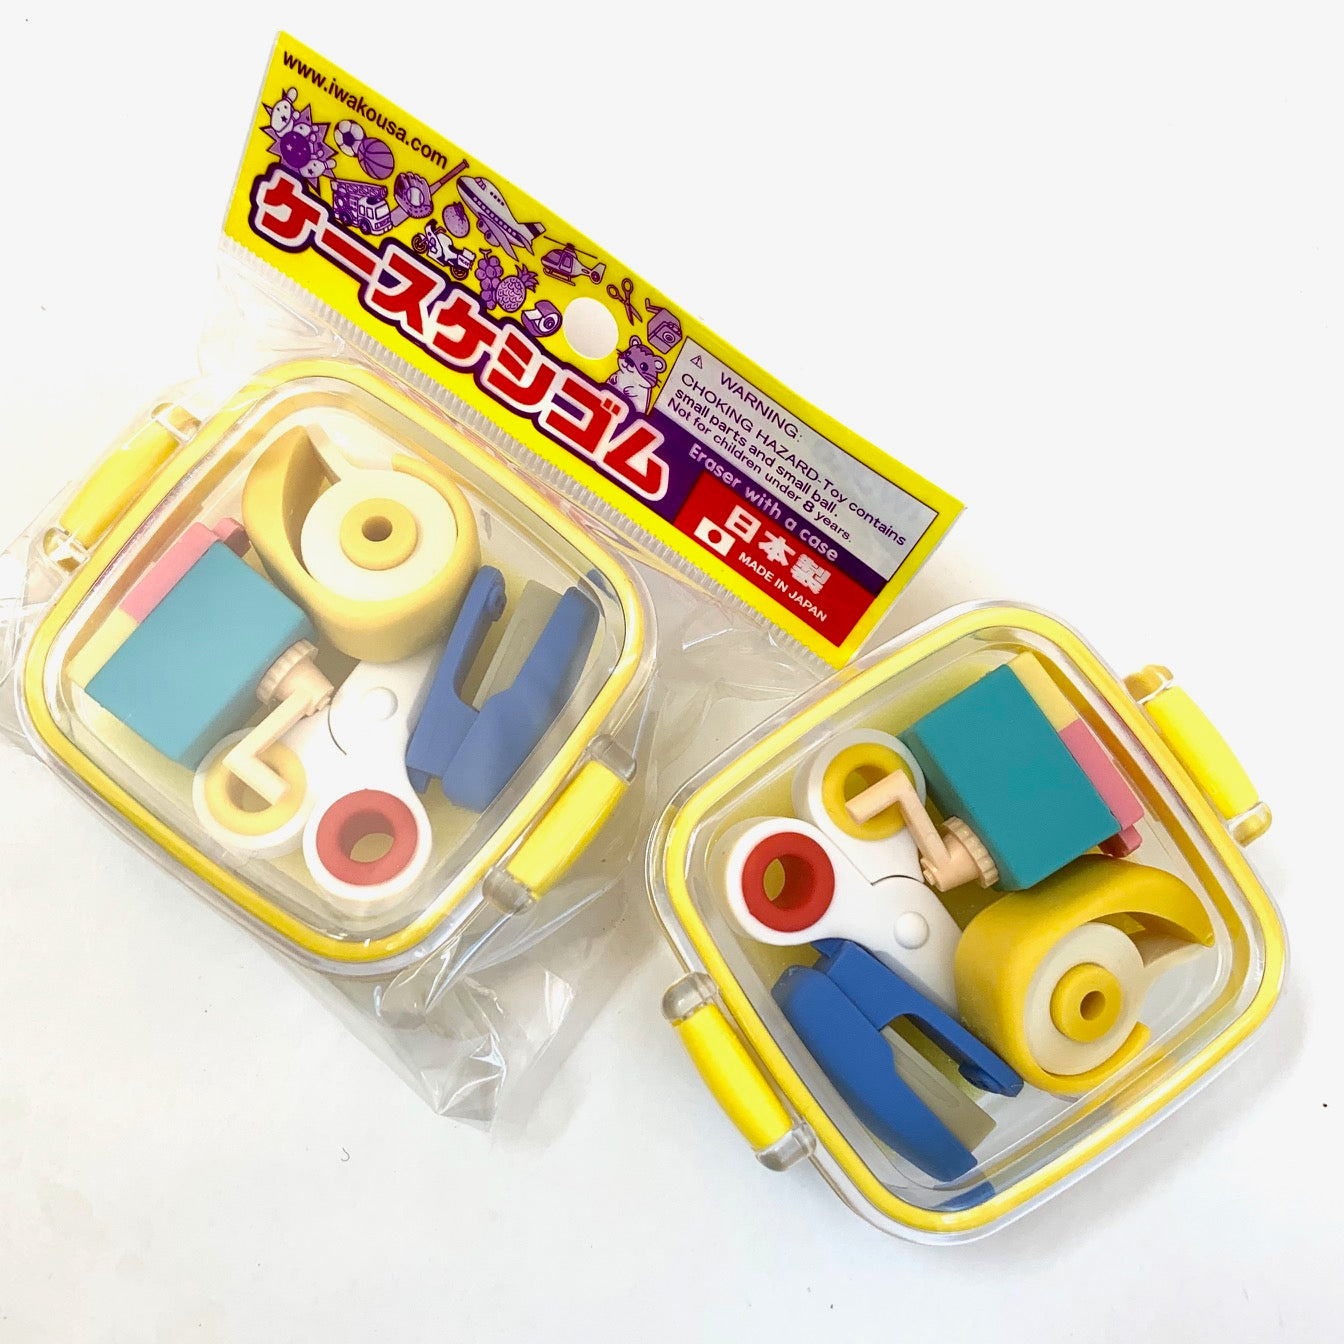 X 38433 4-IWAKO STATIONERY ERASERS IN A BOX-DISCONTINUED